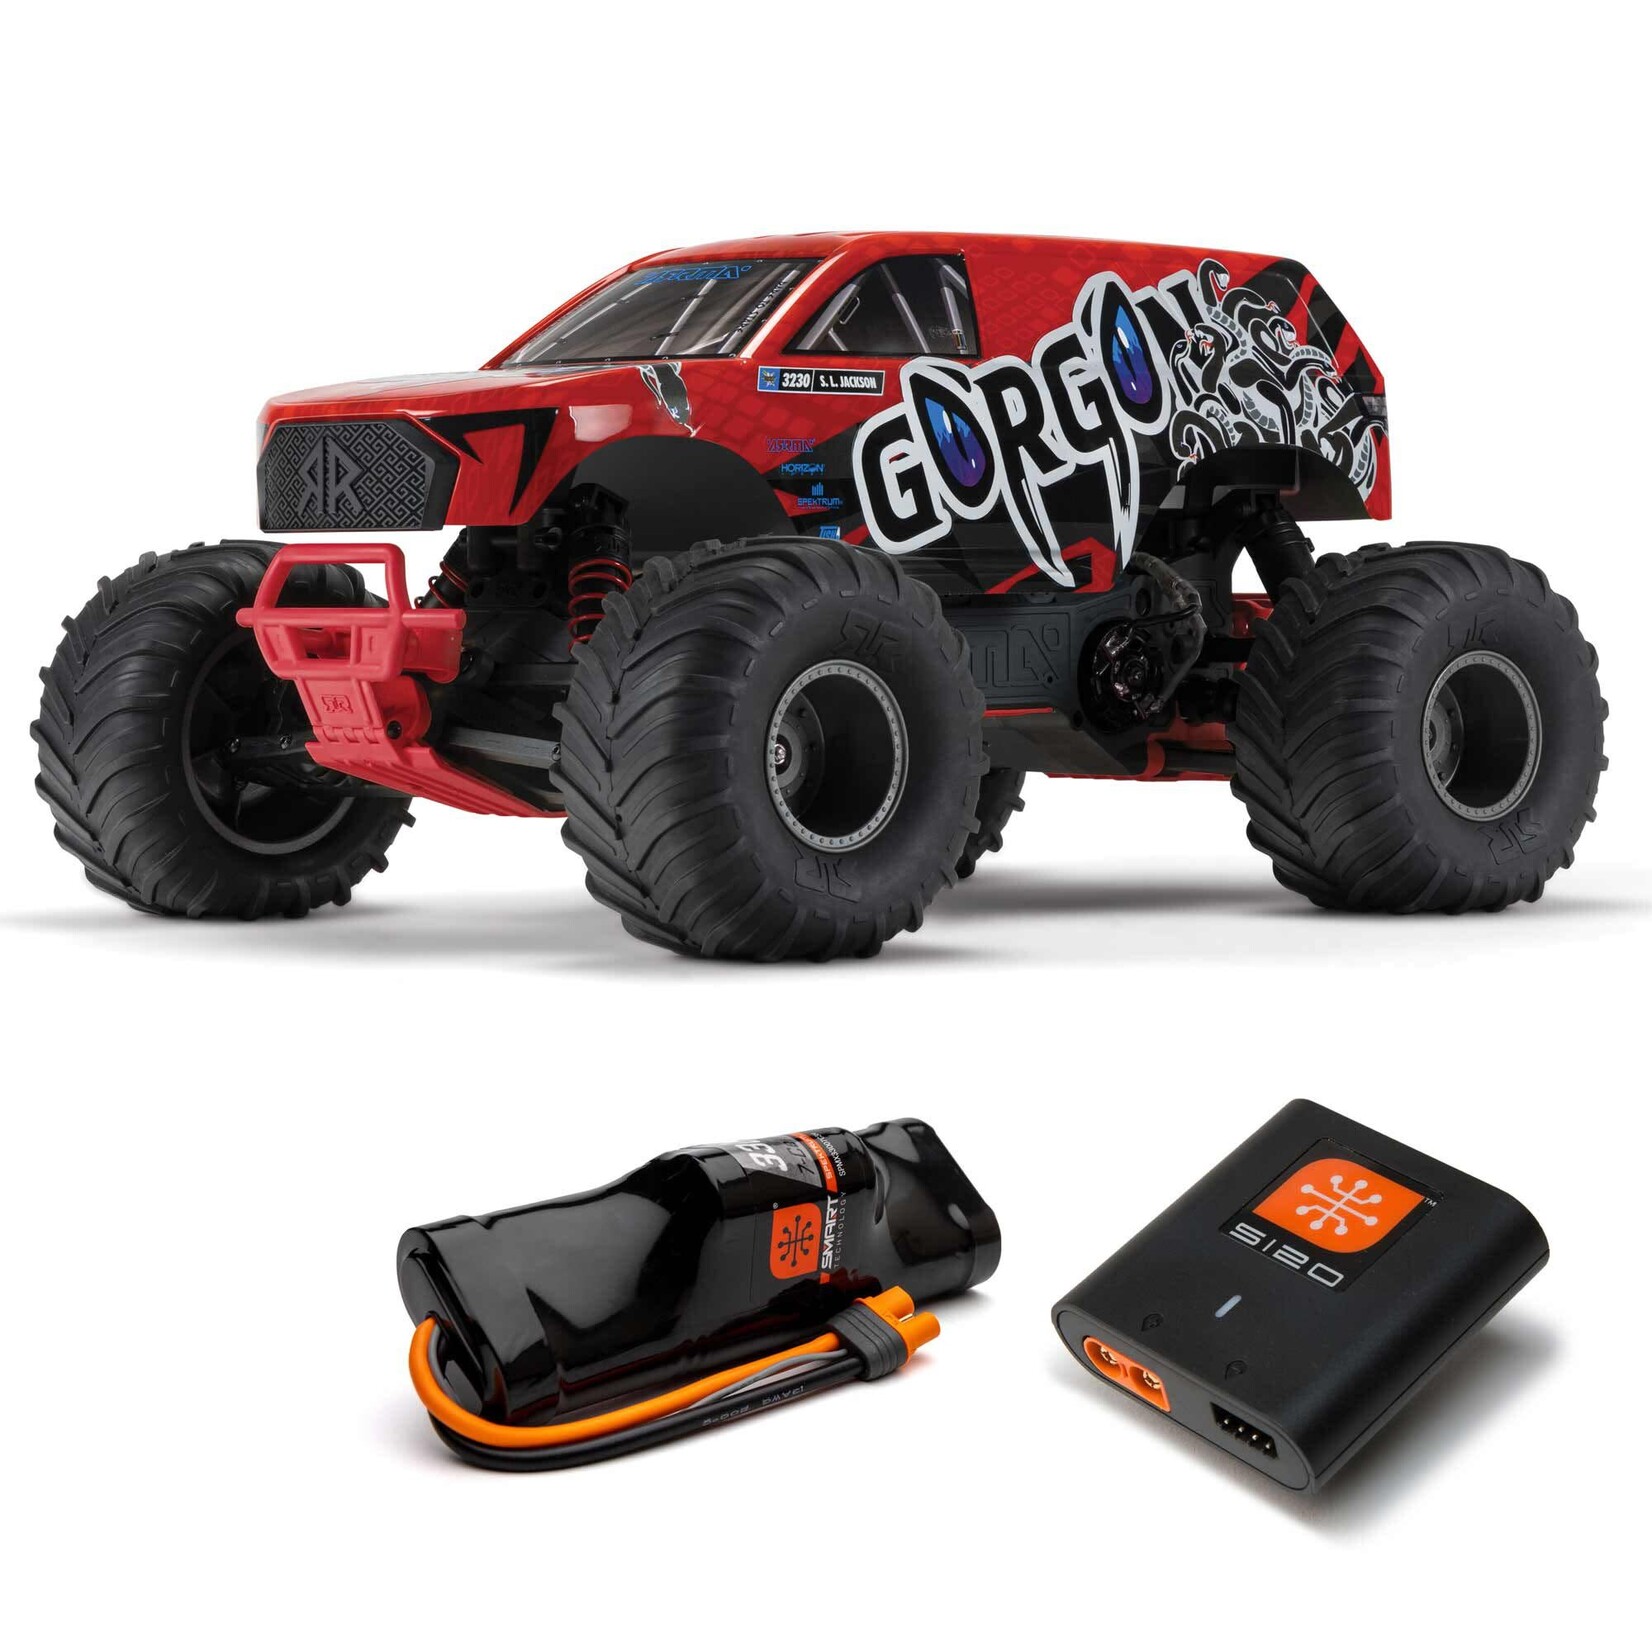 Arrma 1/10 GORGON 4X2 MEGA  Monster Truck RTR with Battery & Charger